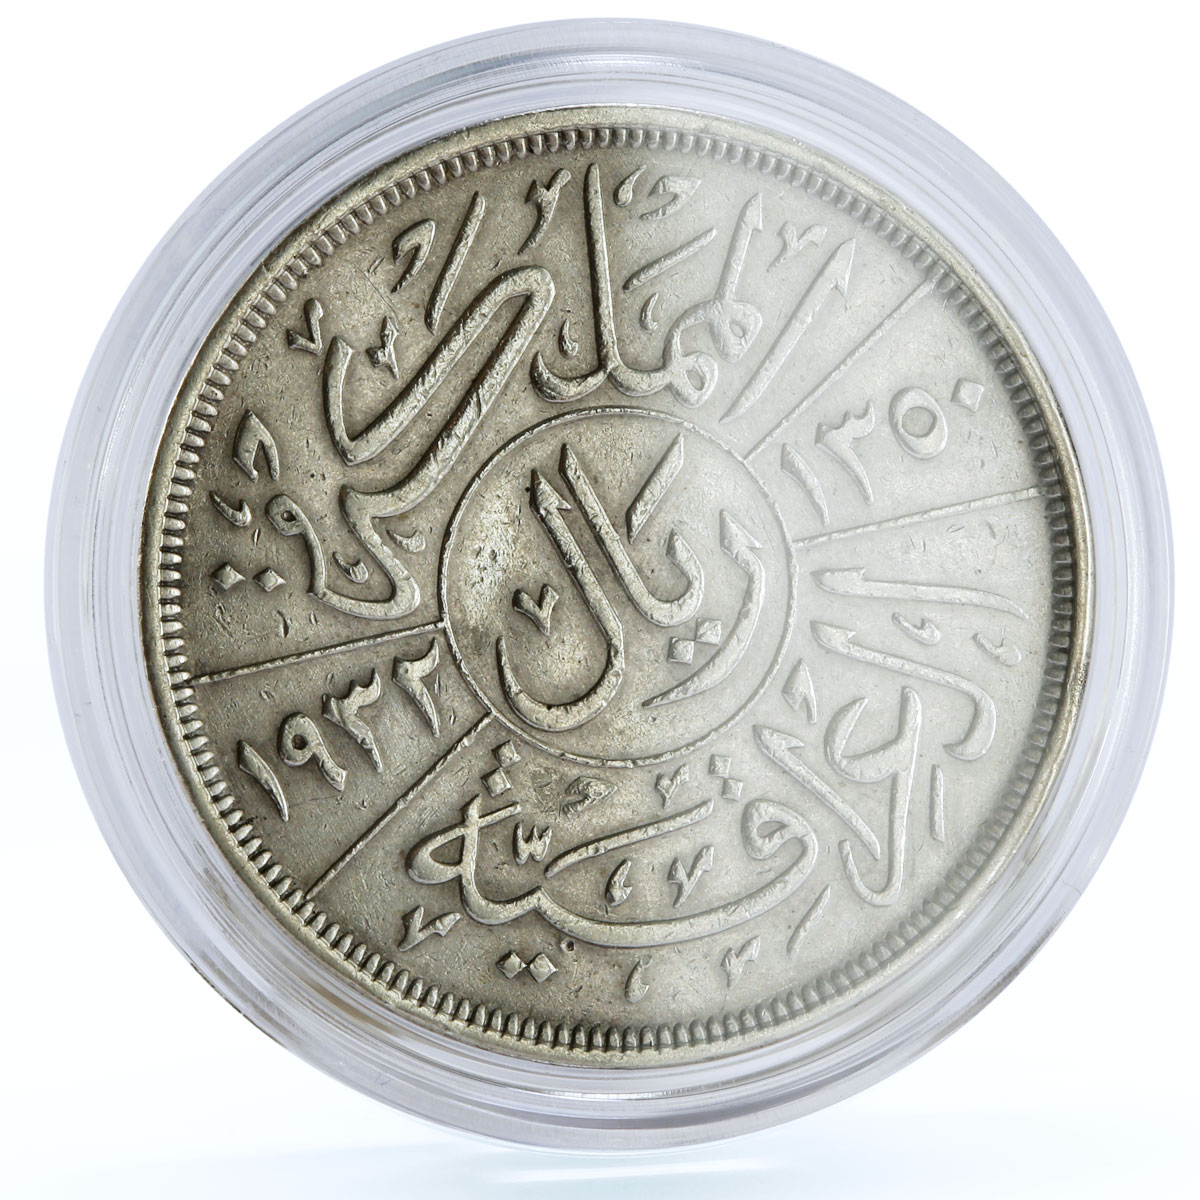 Iraq 1 riyal State Coinage King Faisal I Coat of Arms silver coin 1932